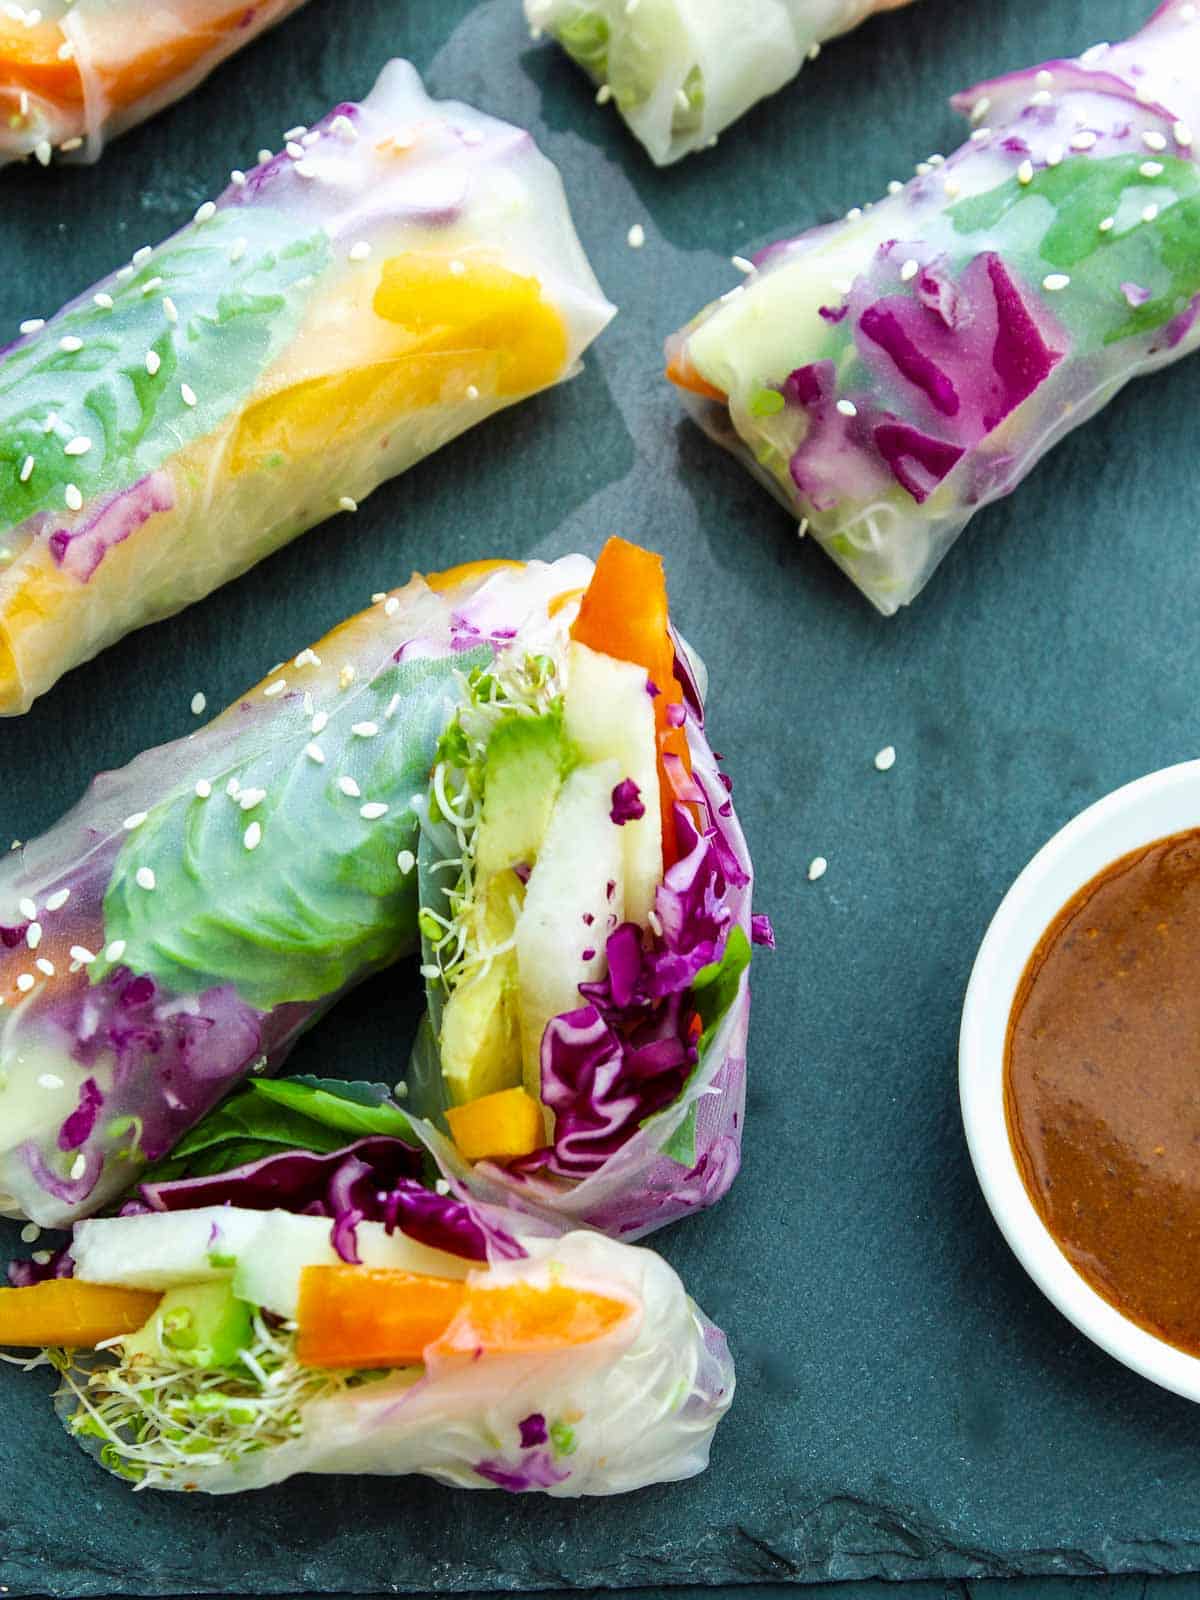 https://www.delicioustable.com/wp-content/uploads/2022/05/Spring-rolls-sliced-open-with-ginger-dipping-sauce.jpg